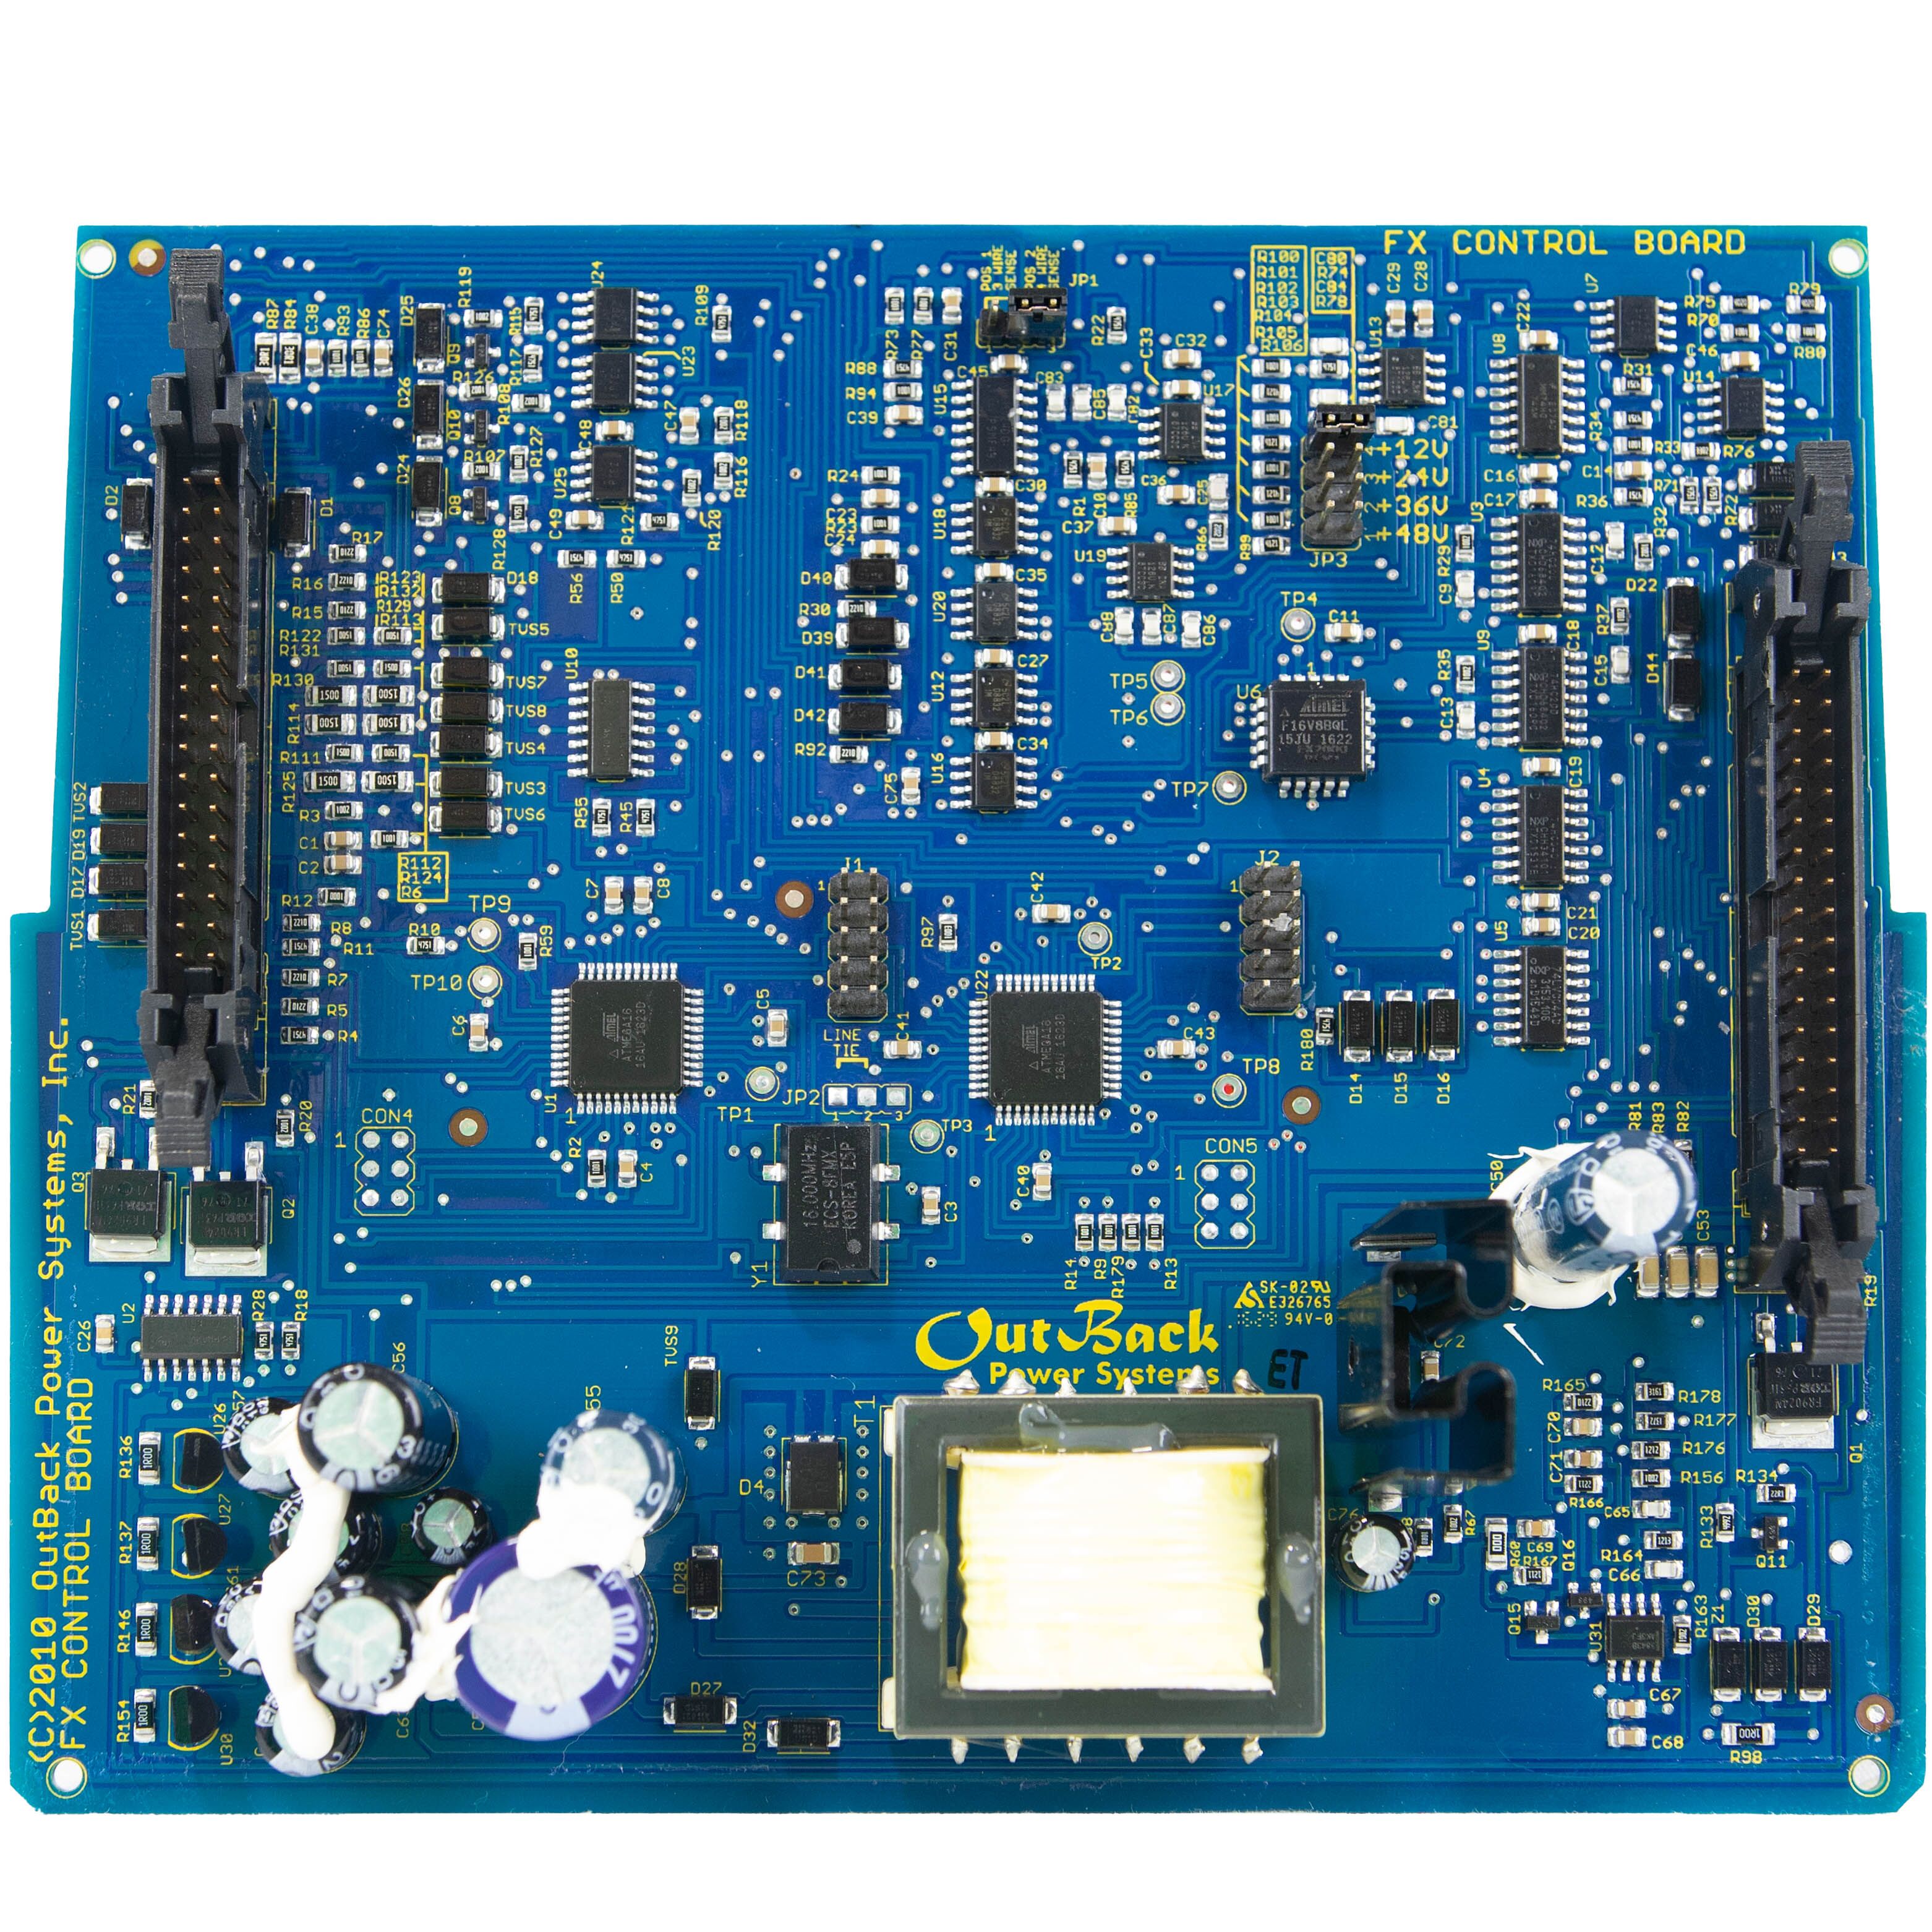 outback power spare 105 control board